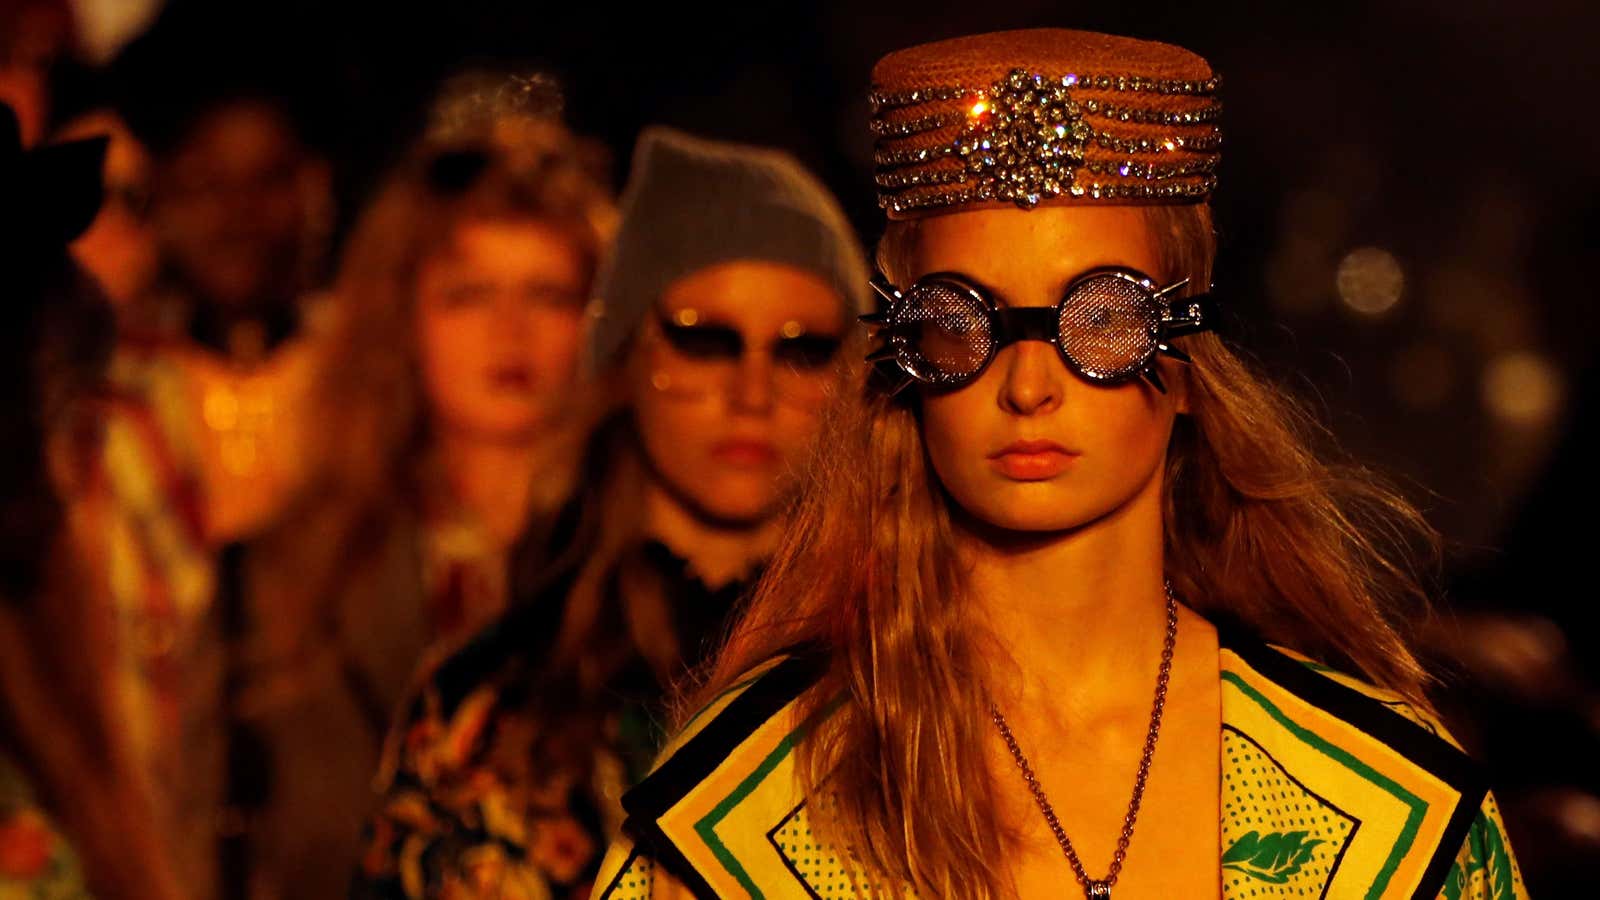 Gucci’s sales plunged in the pandemic and are still struggling to recover.